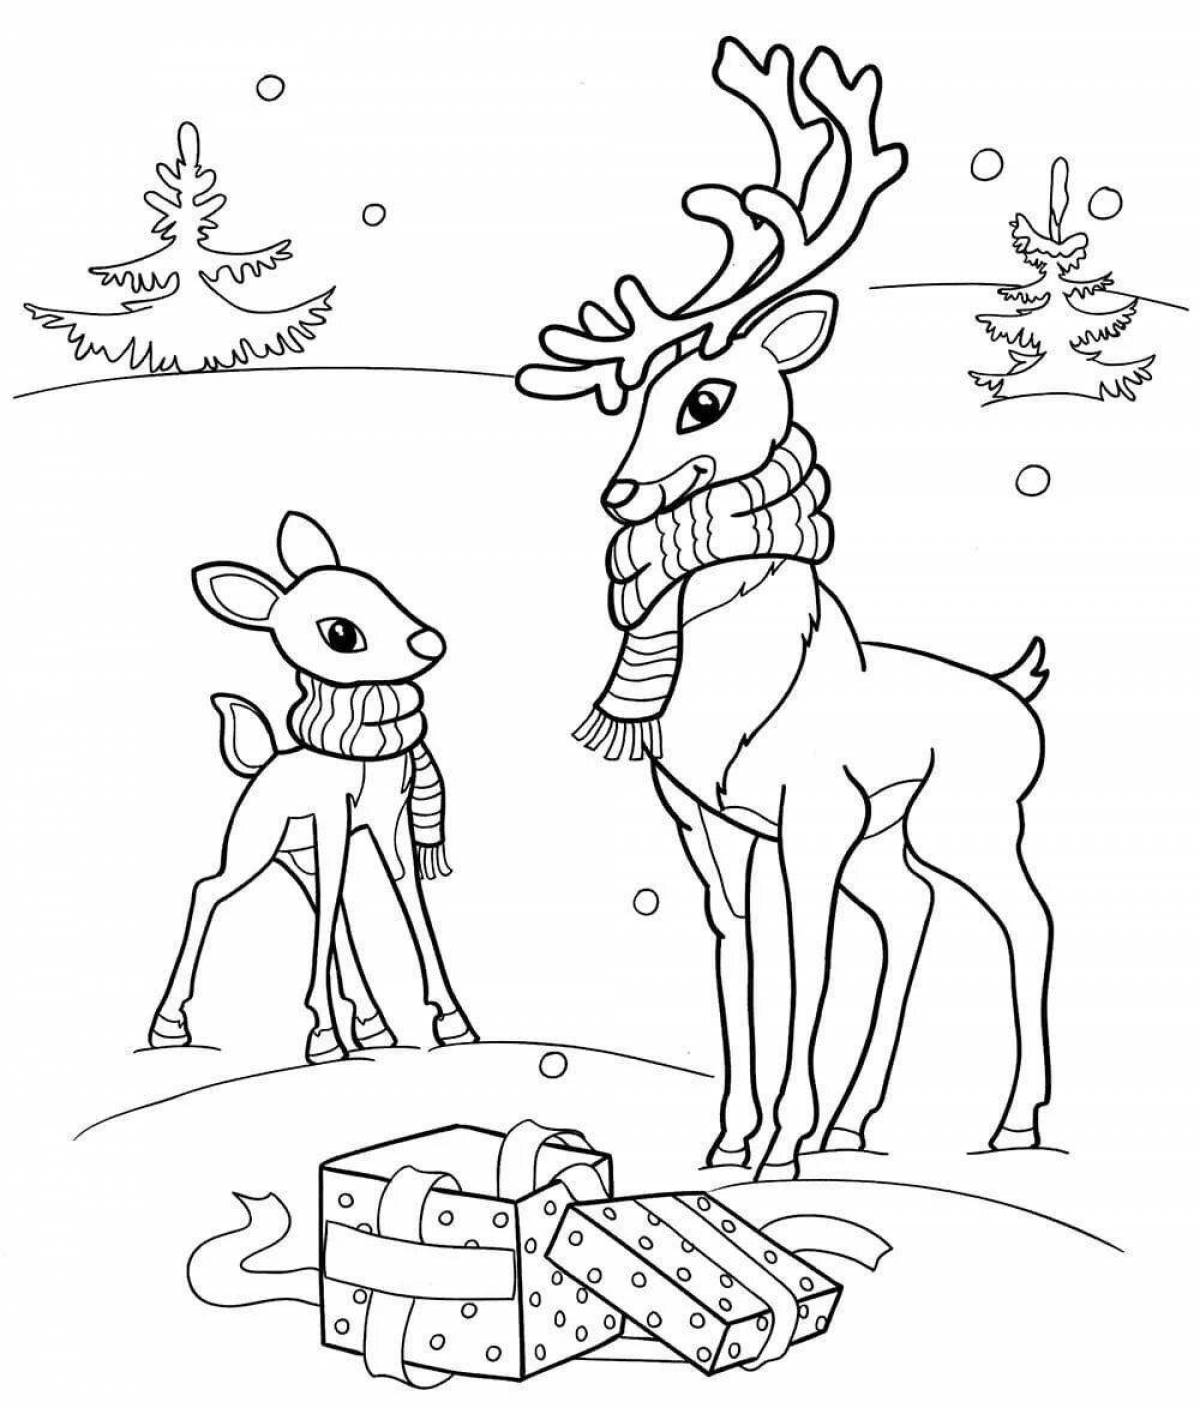 Animated winter animal coloring page